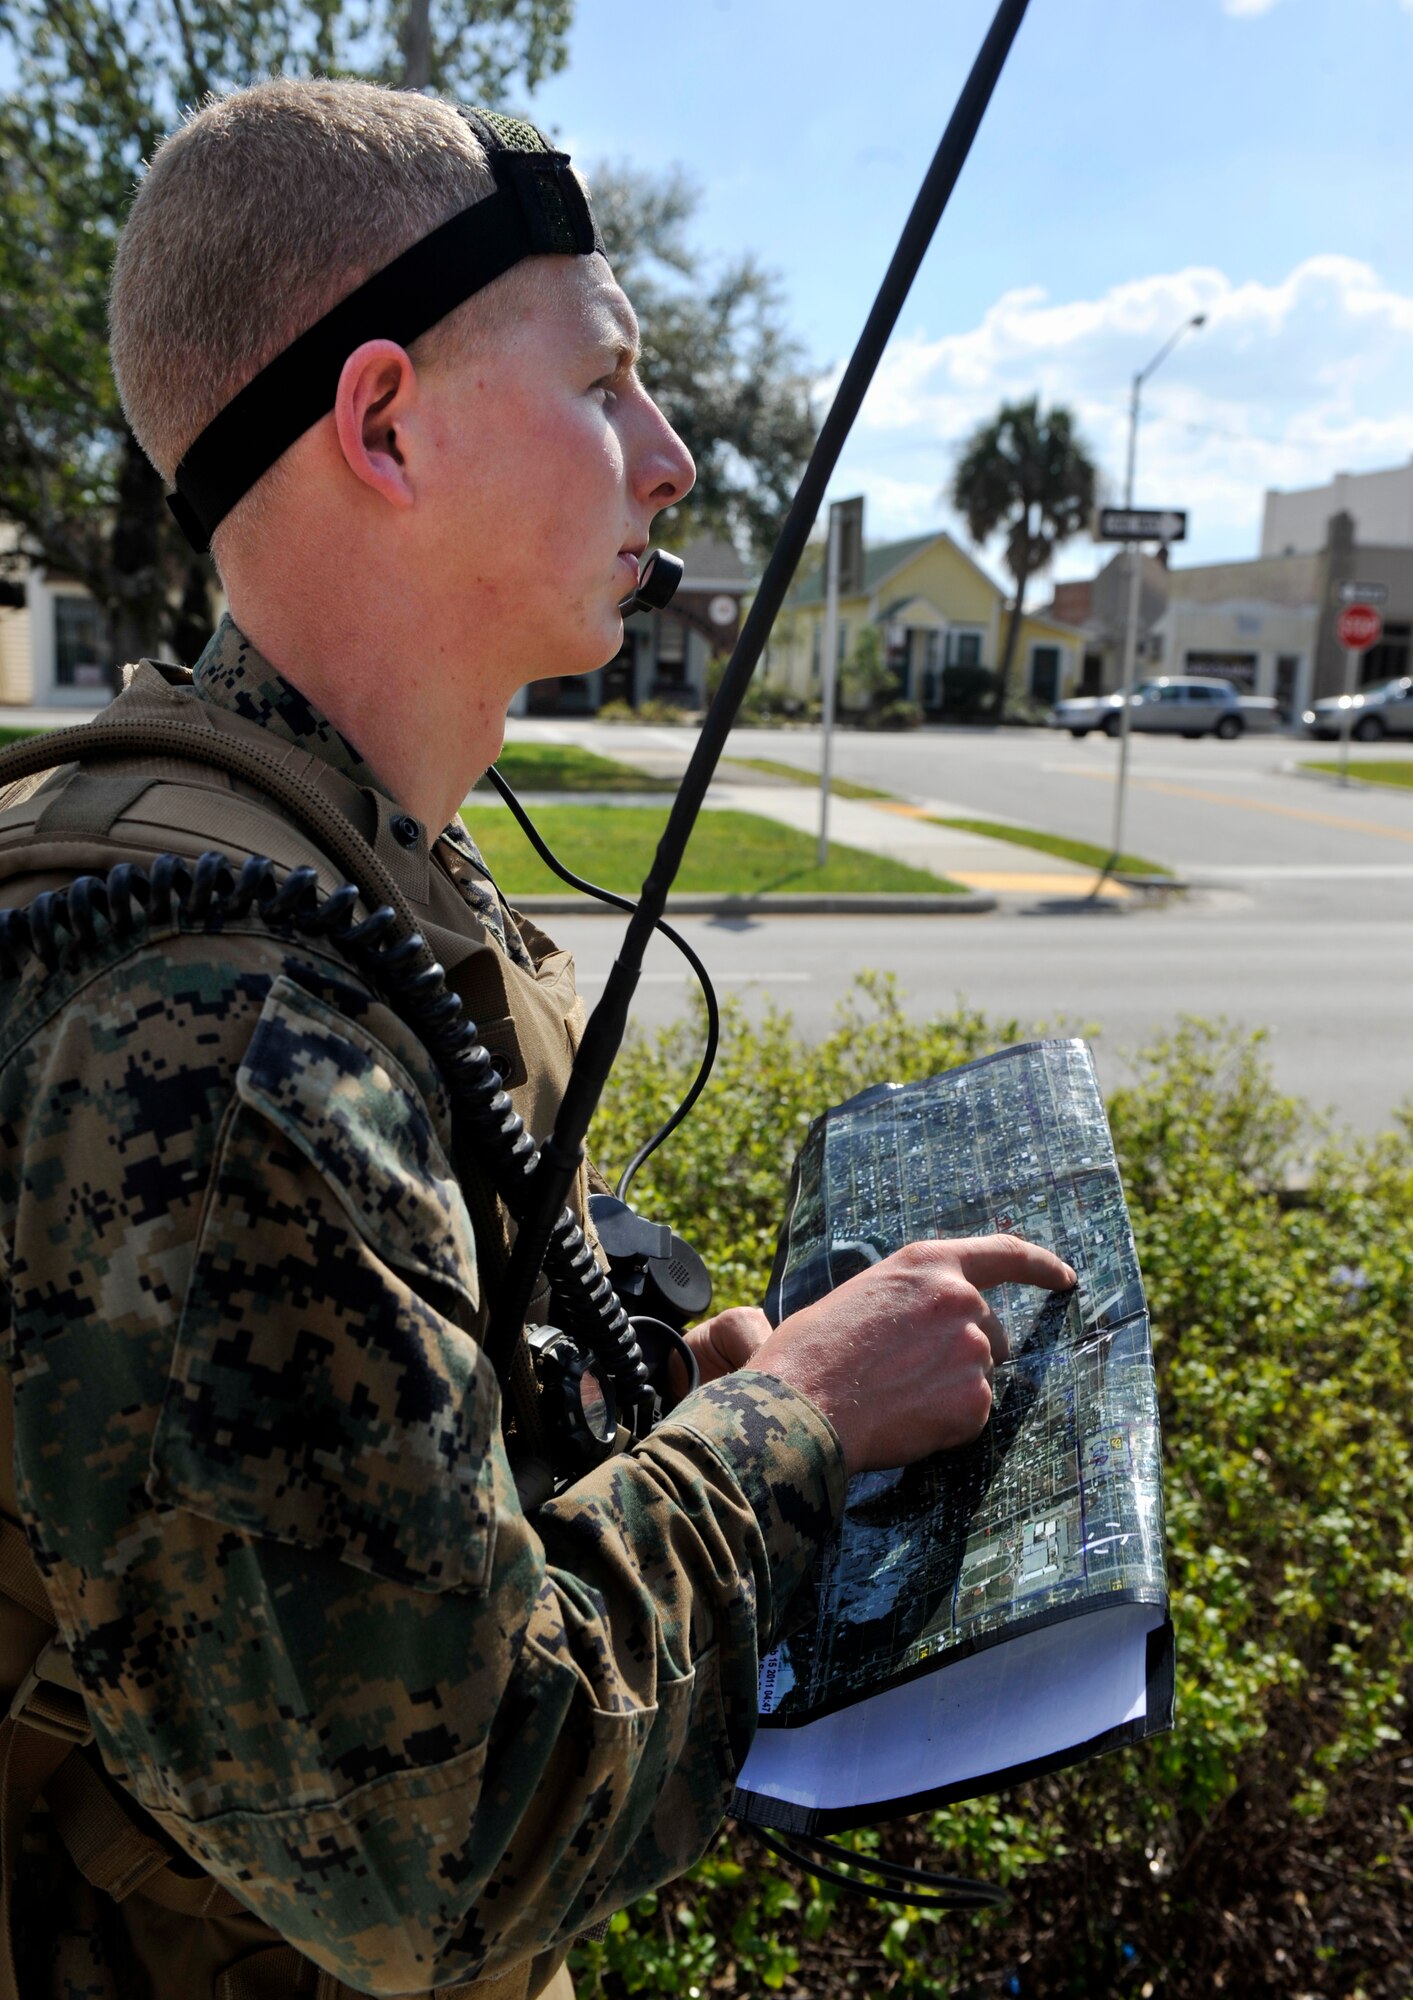 AVON PARK, Fla.-- Marine Corps Lance Cpl. James Swaffield, 1st Battalion, 11th Marines joint fires observer, traces his finger across the map as he moves toward their objective during joint exercise ATLANTIC STRIKE 11-01 Feb. 16. During the urban tactics scenario, the JFOs observed targets and relayed critical information to the joint terminal attack controller and the aircraft. (U.S. Air Force photo/Airman 1st Class Nicholas Benroth)(RELEASED